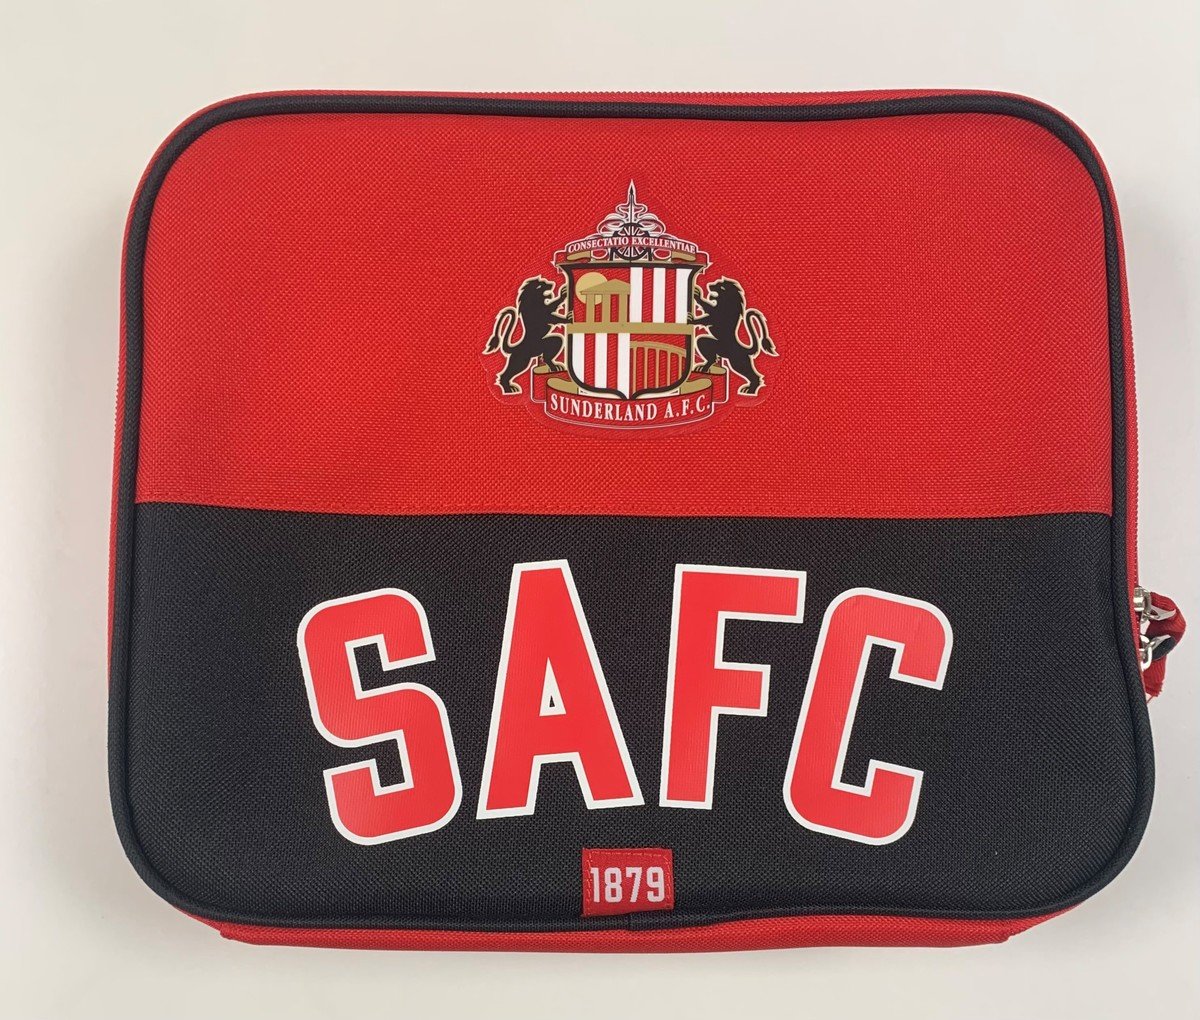 SAFC Lunch bag